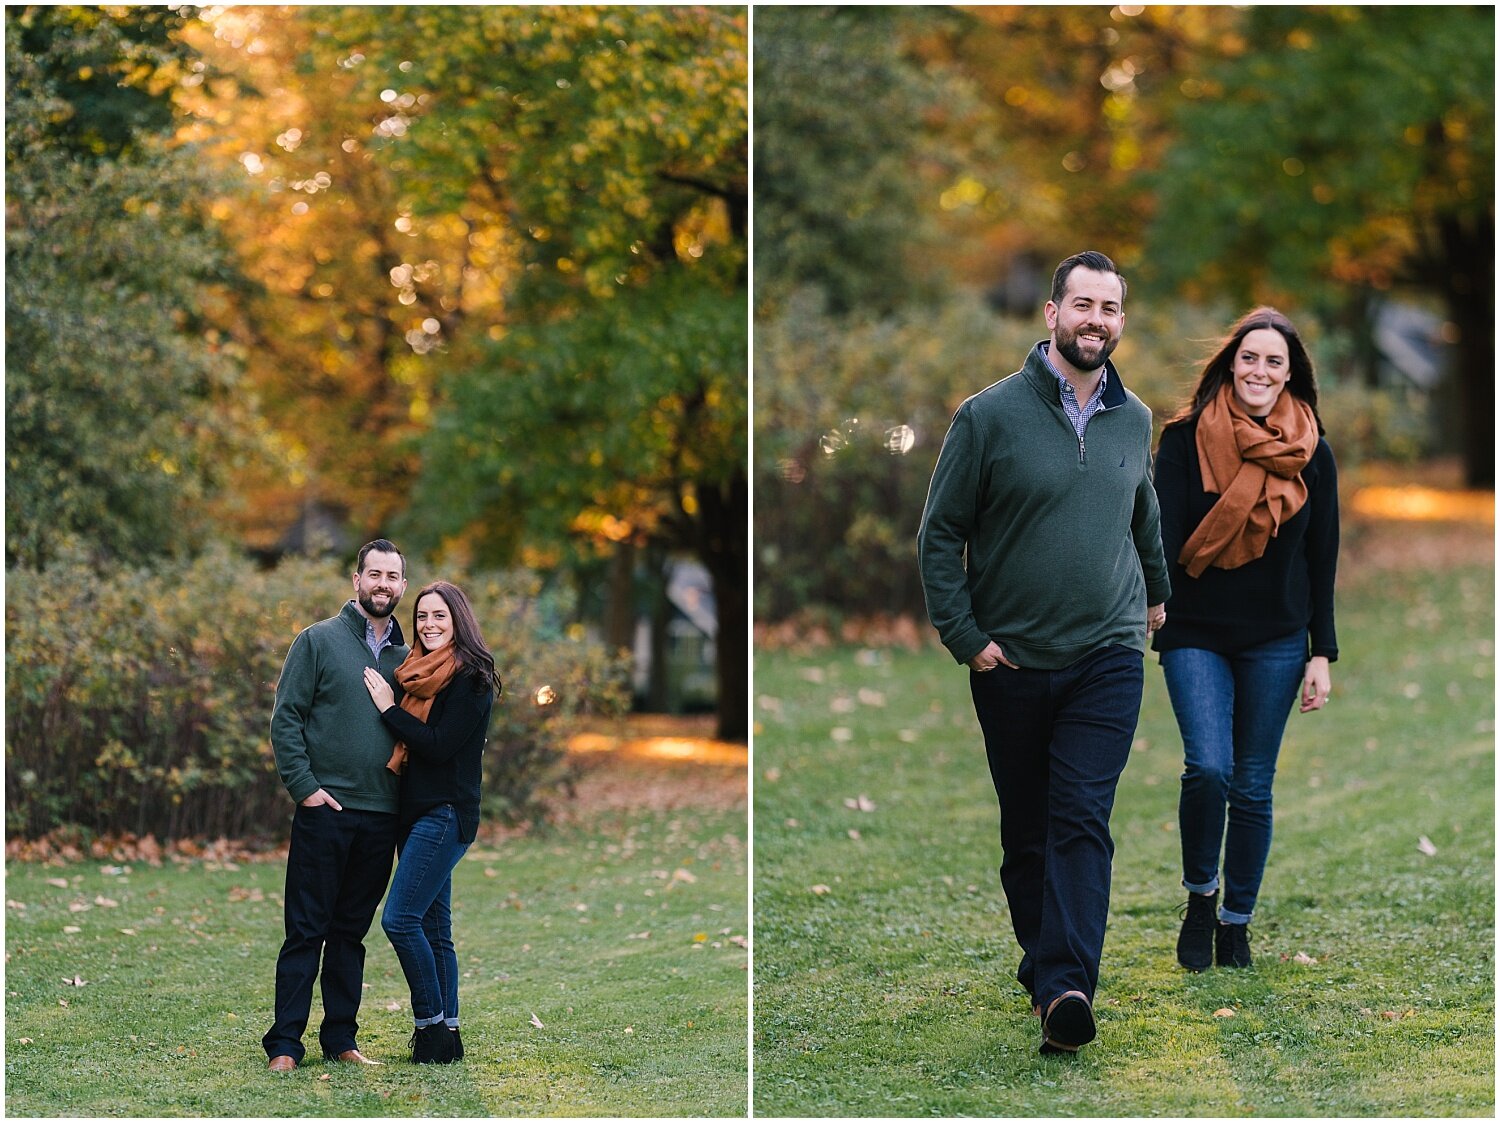 living+roots+wine+engagement+session+rochester+ny+wedding+photographer (17).jpg